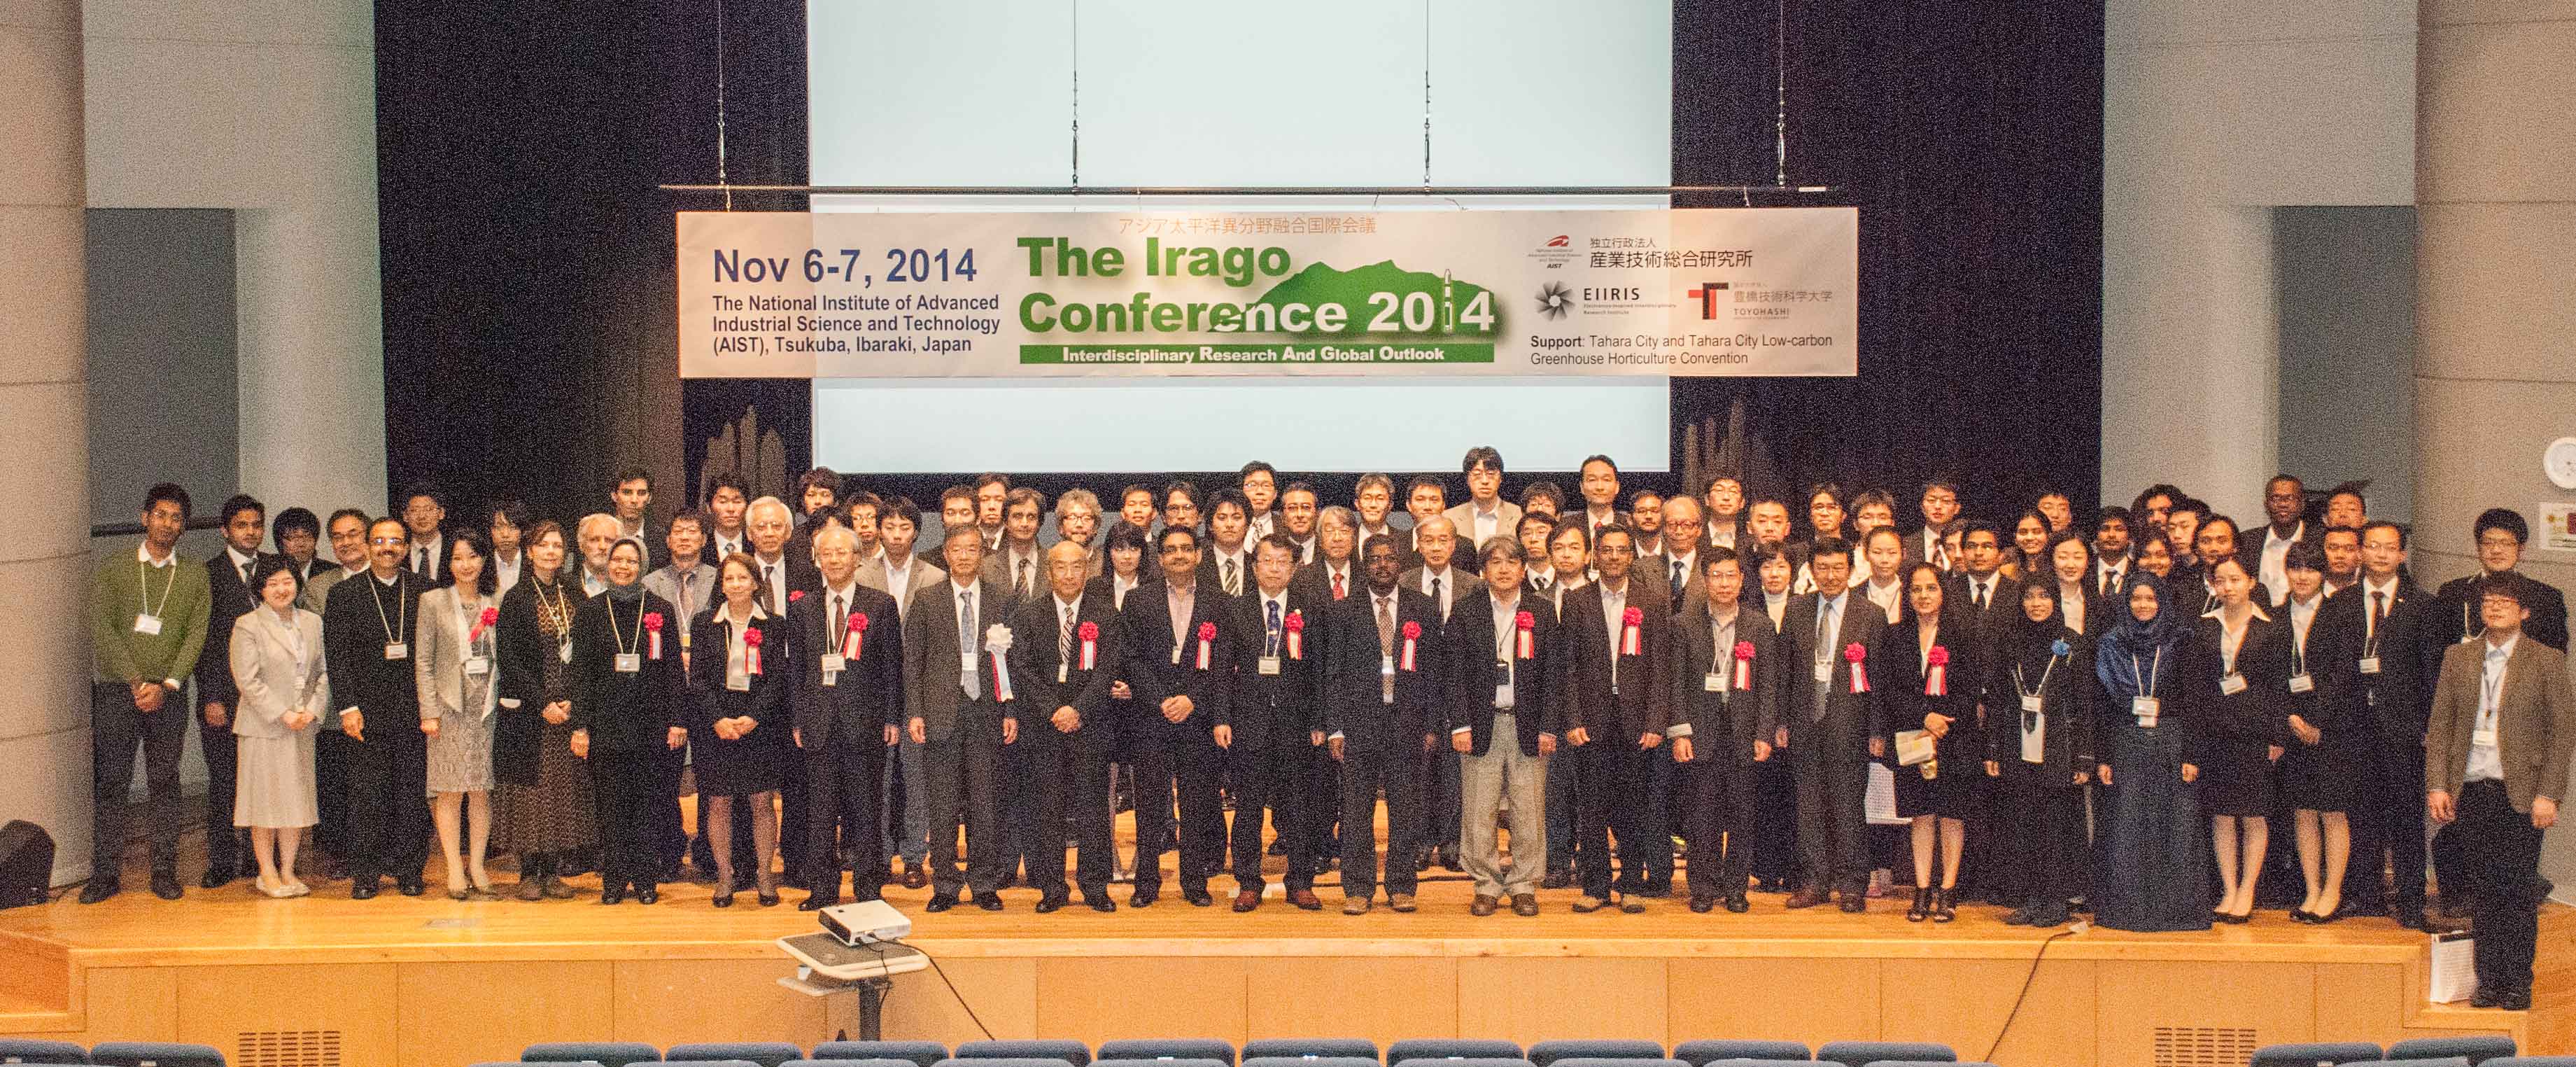 Conference Photo 2014